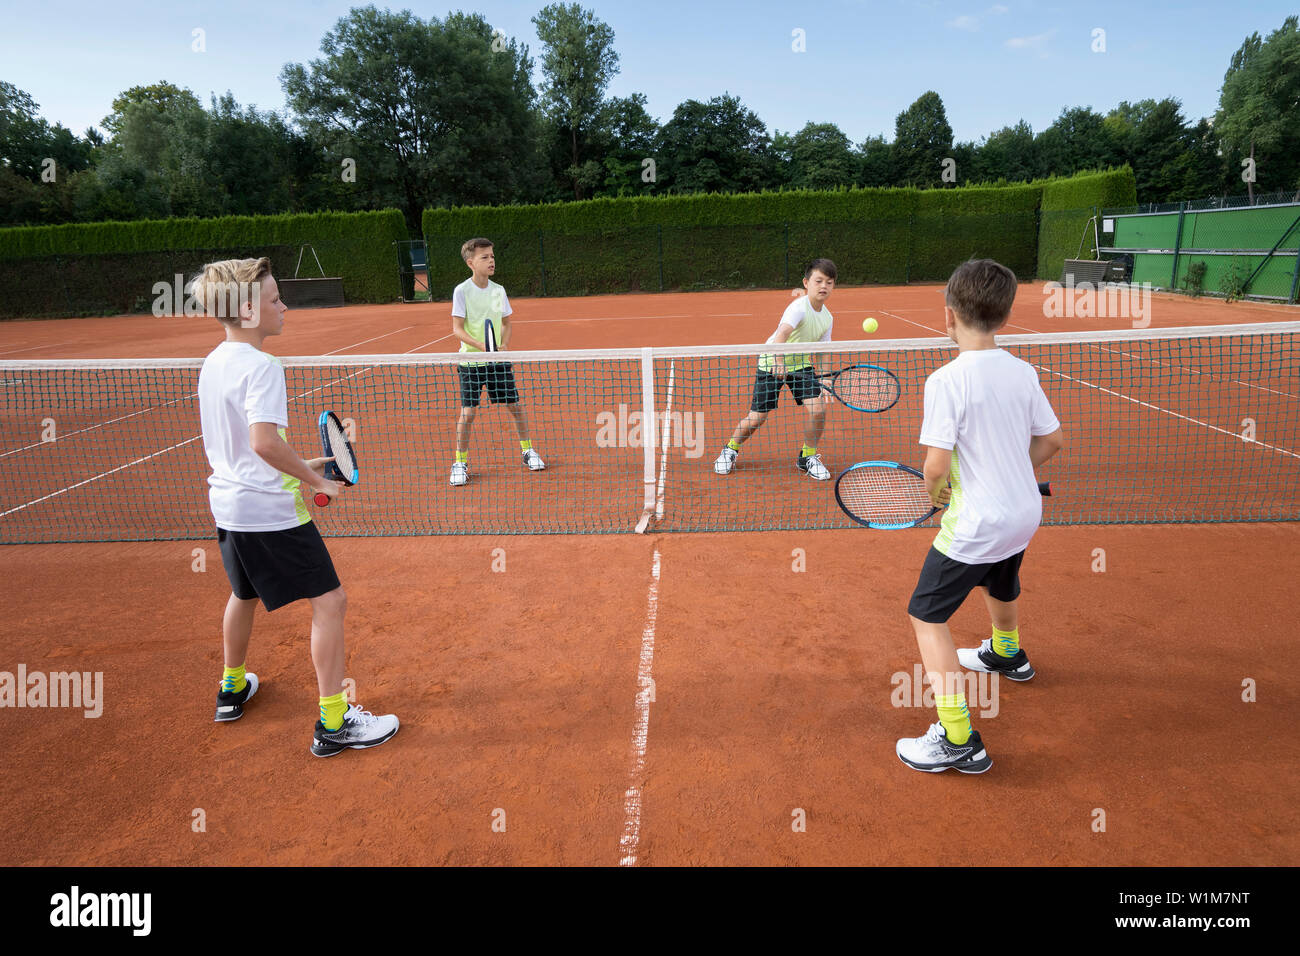 Young boys playing tennis, Bavaria, Germany Stock Photo